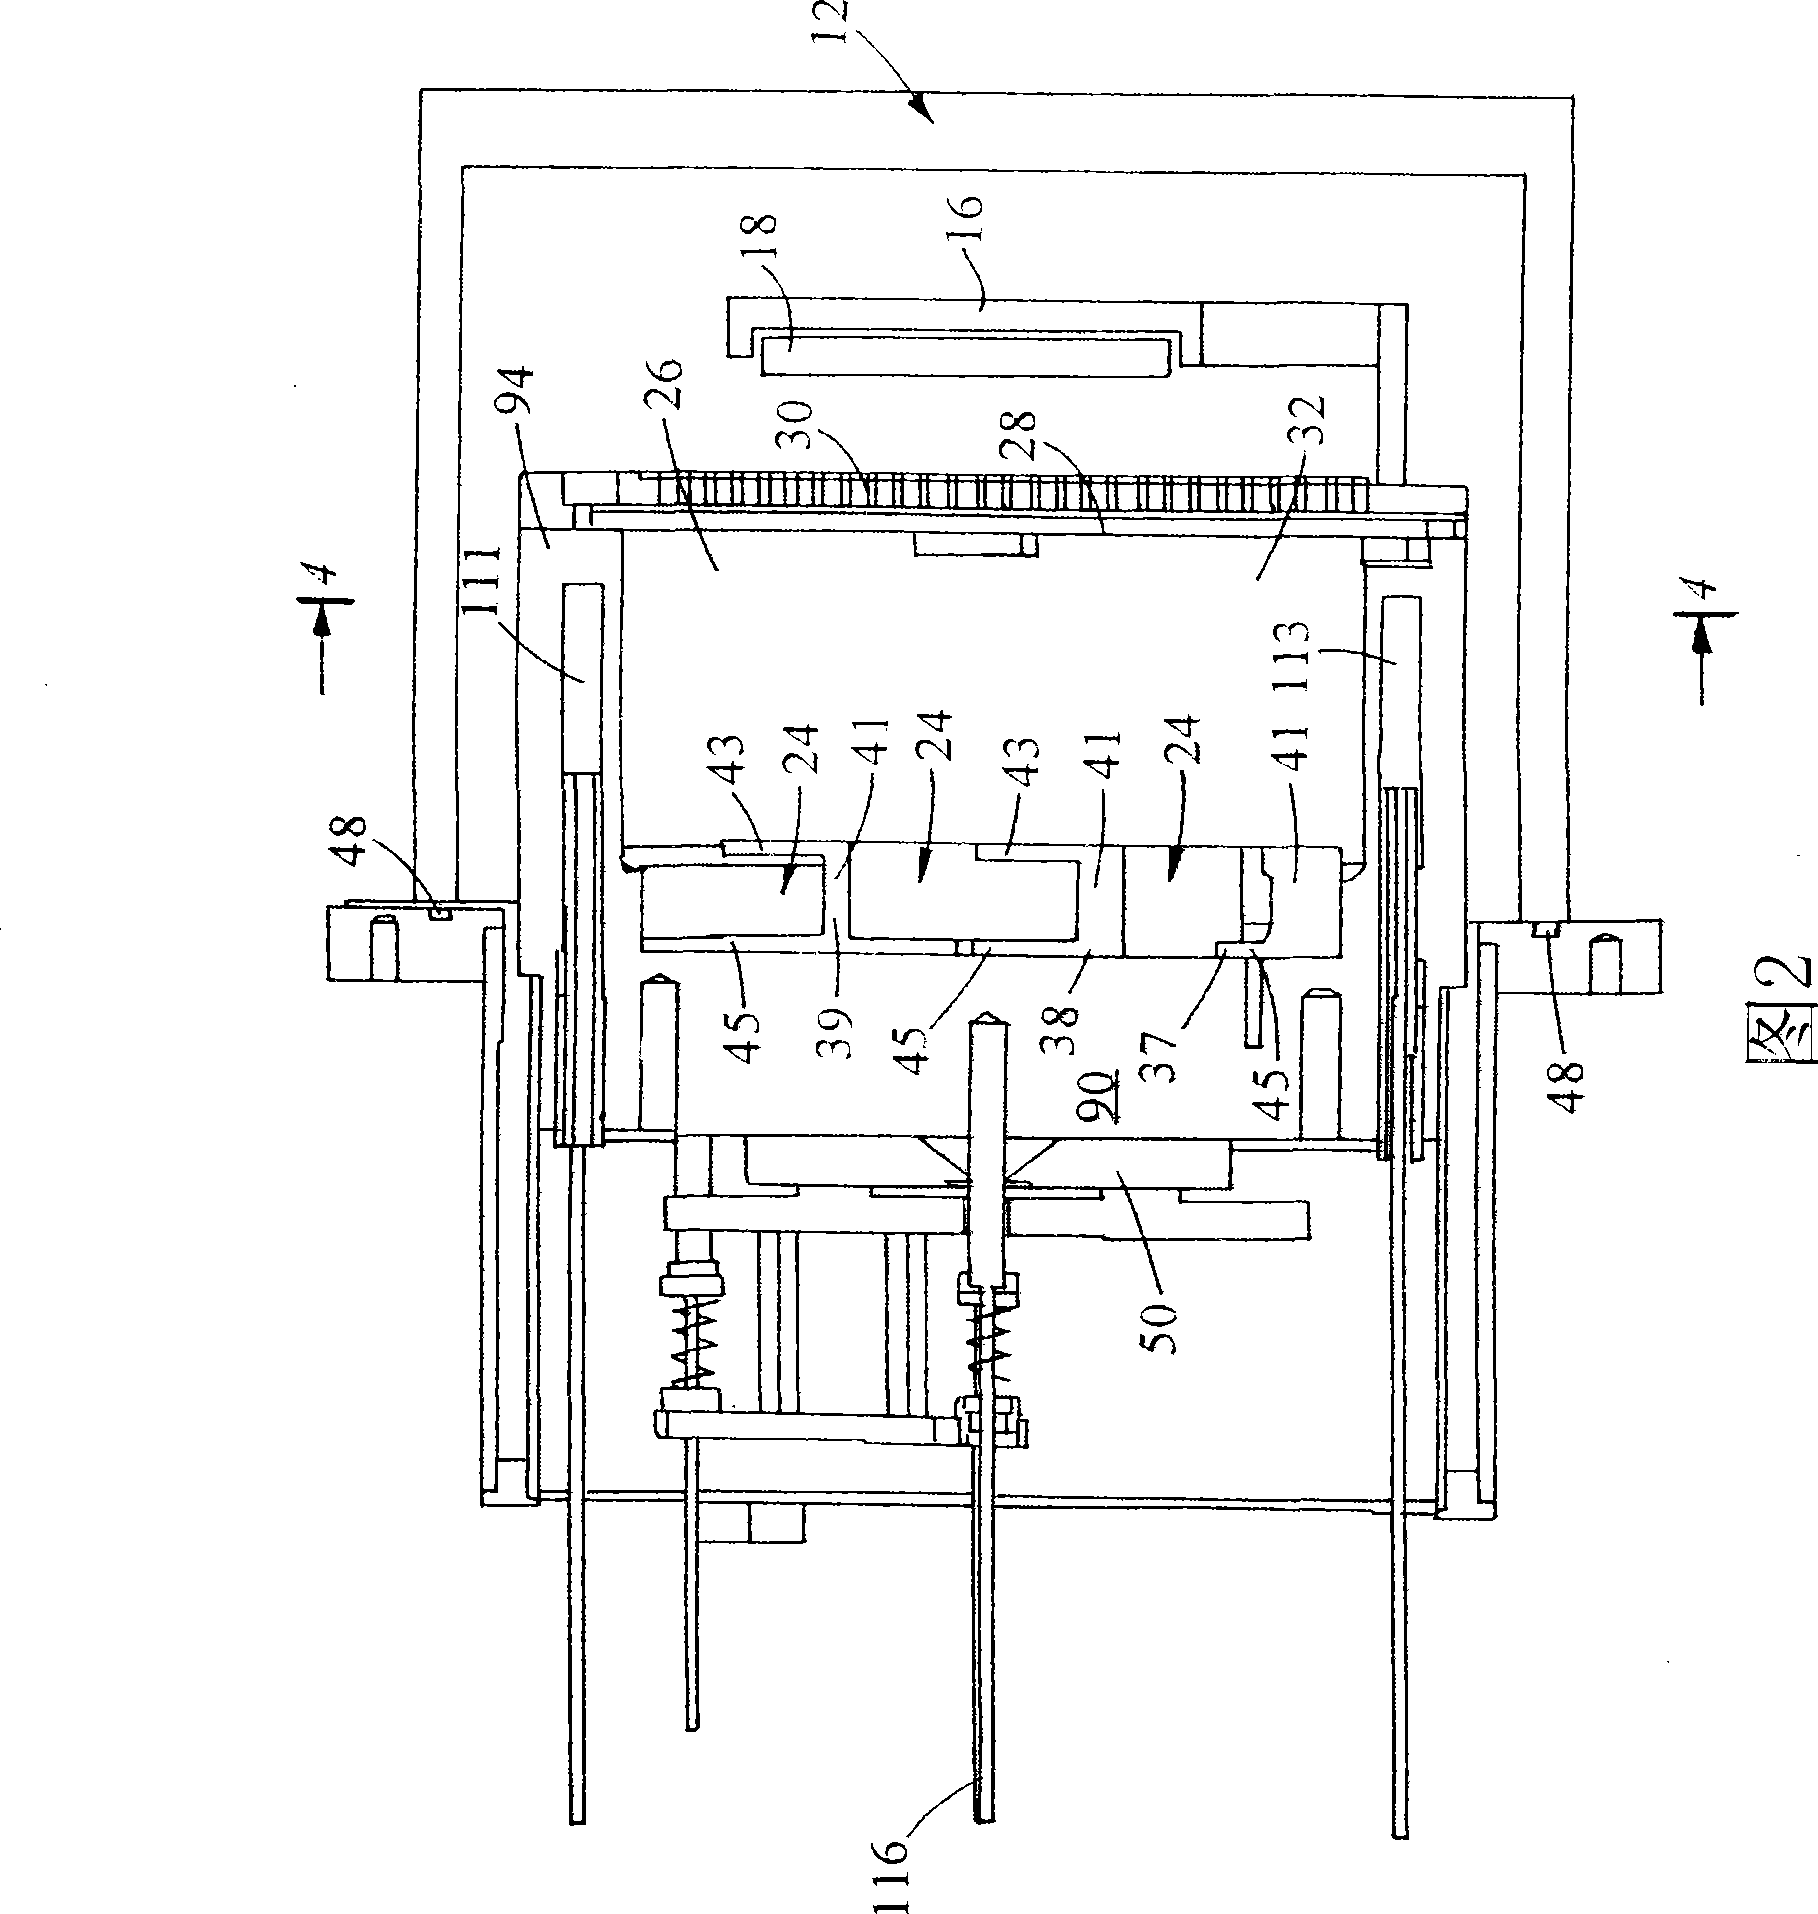 Method of and apparatus for monitoring flow of lubricant vapor forming lubricant coatings of magnetic disks